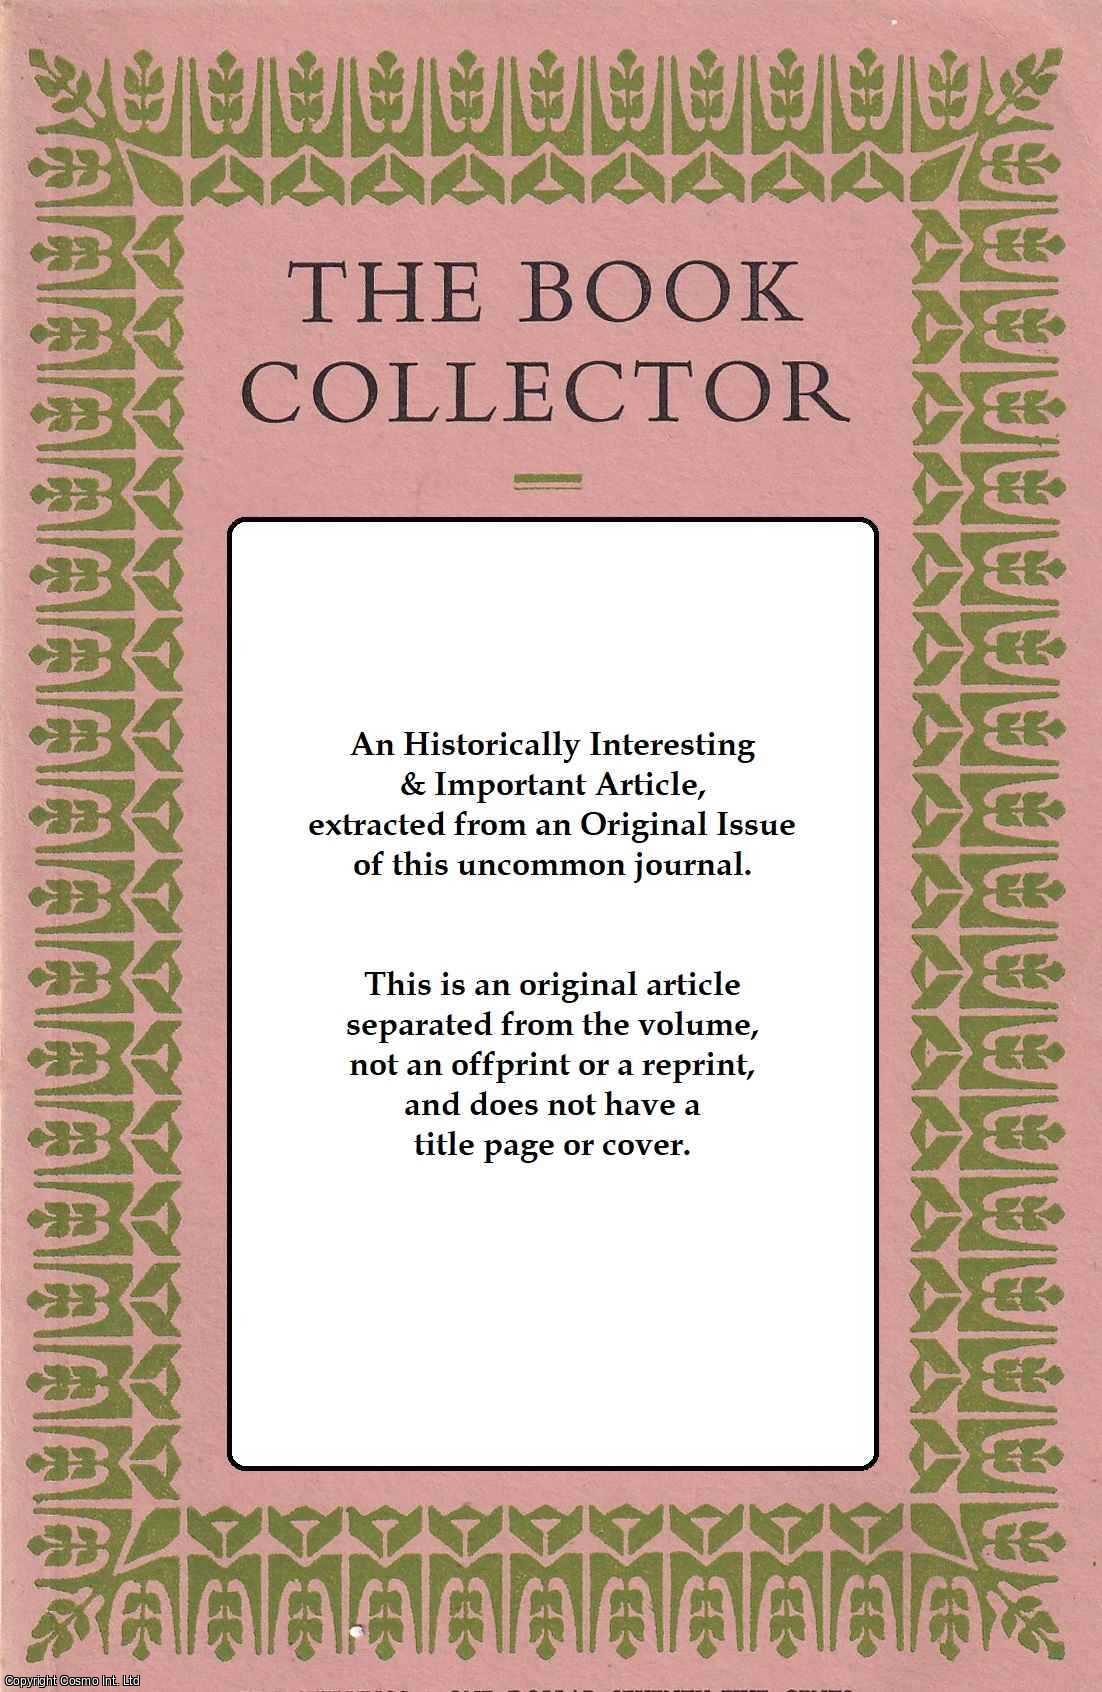 Ronald Mansbridge - J. P. Morgan and I: Book Collectors. This is an original article separated from an issue of The Book Collector Journal.